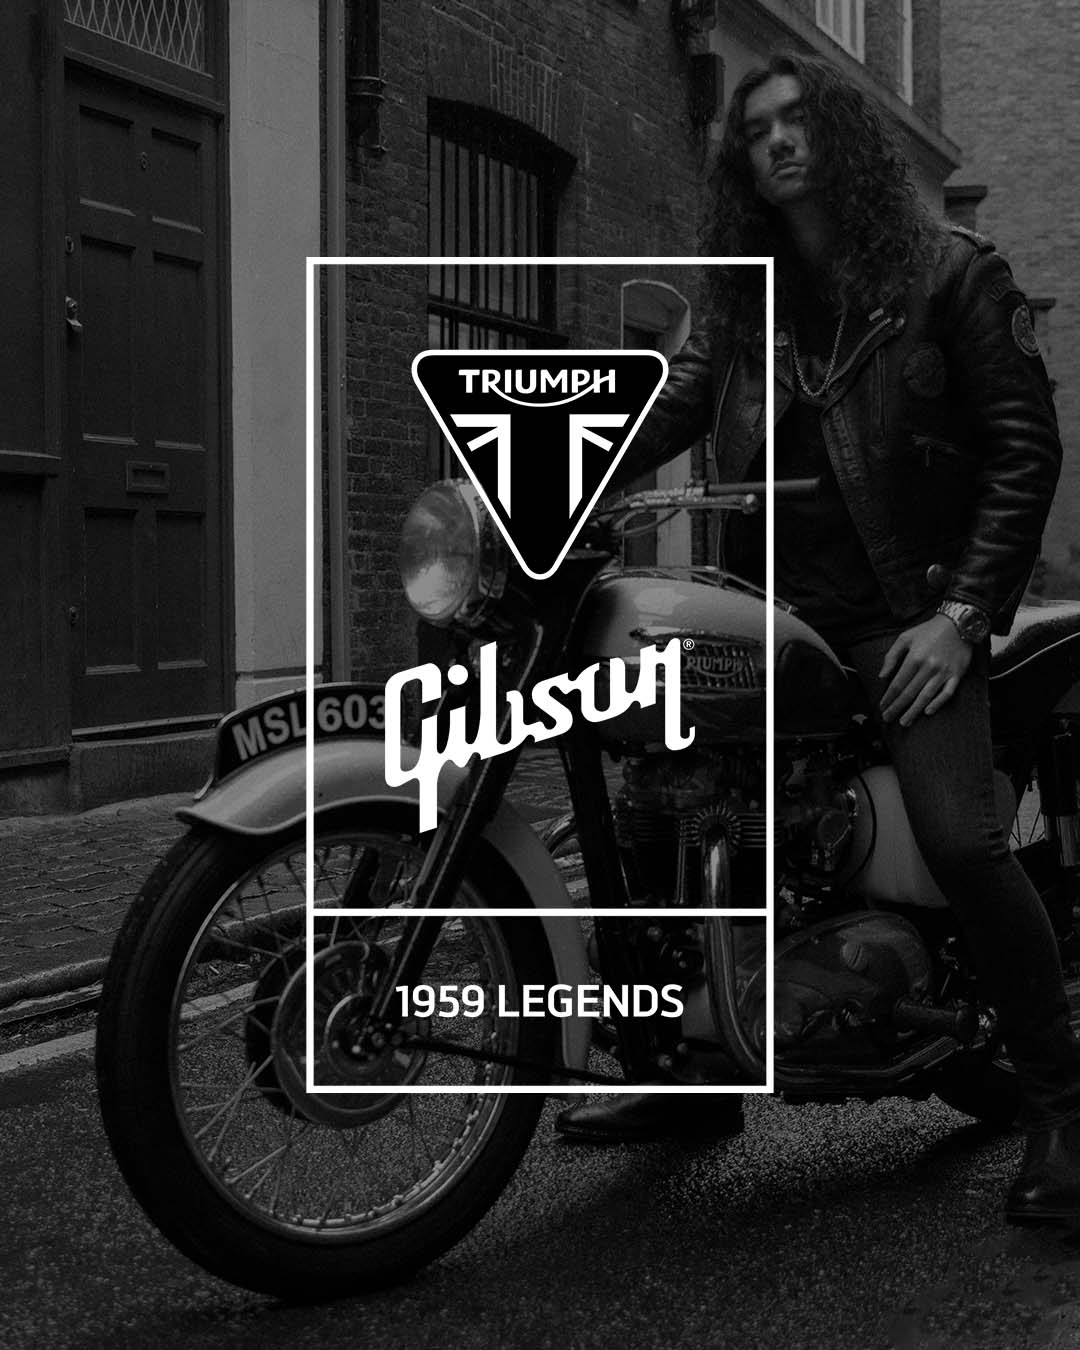 Triumph tease us with a new collaboration..